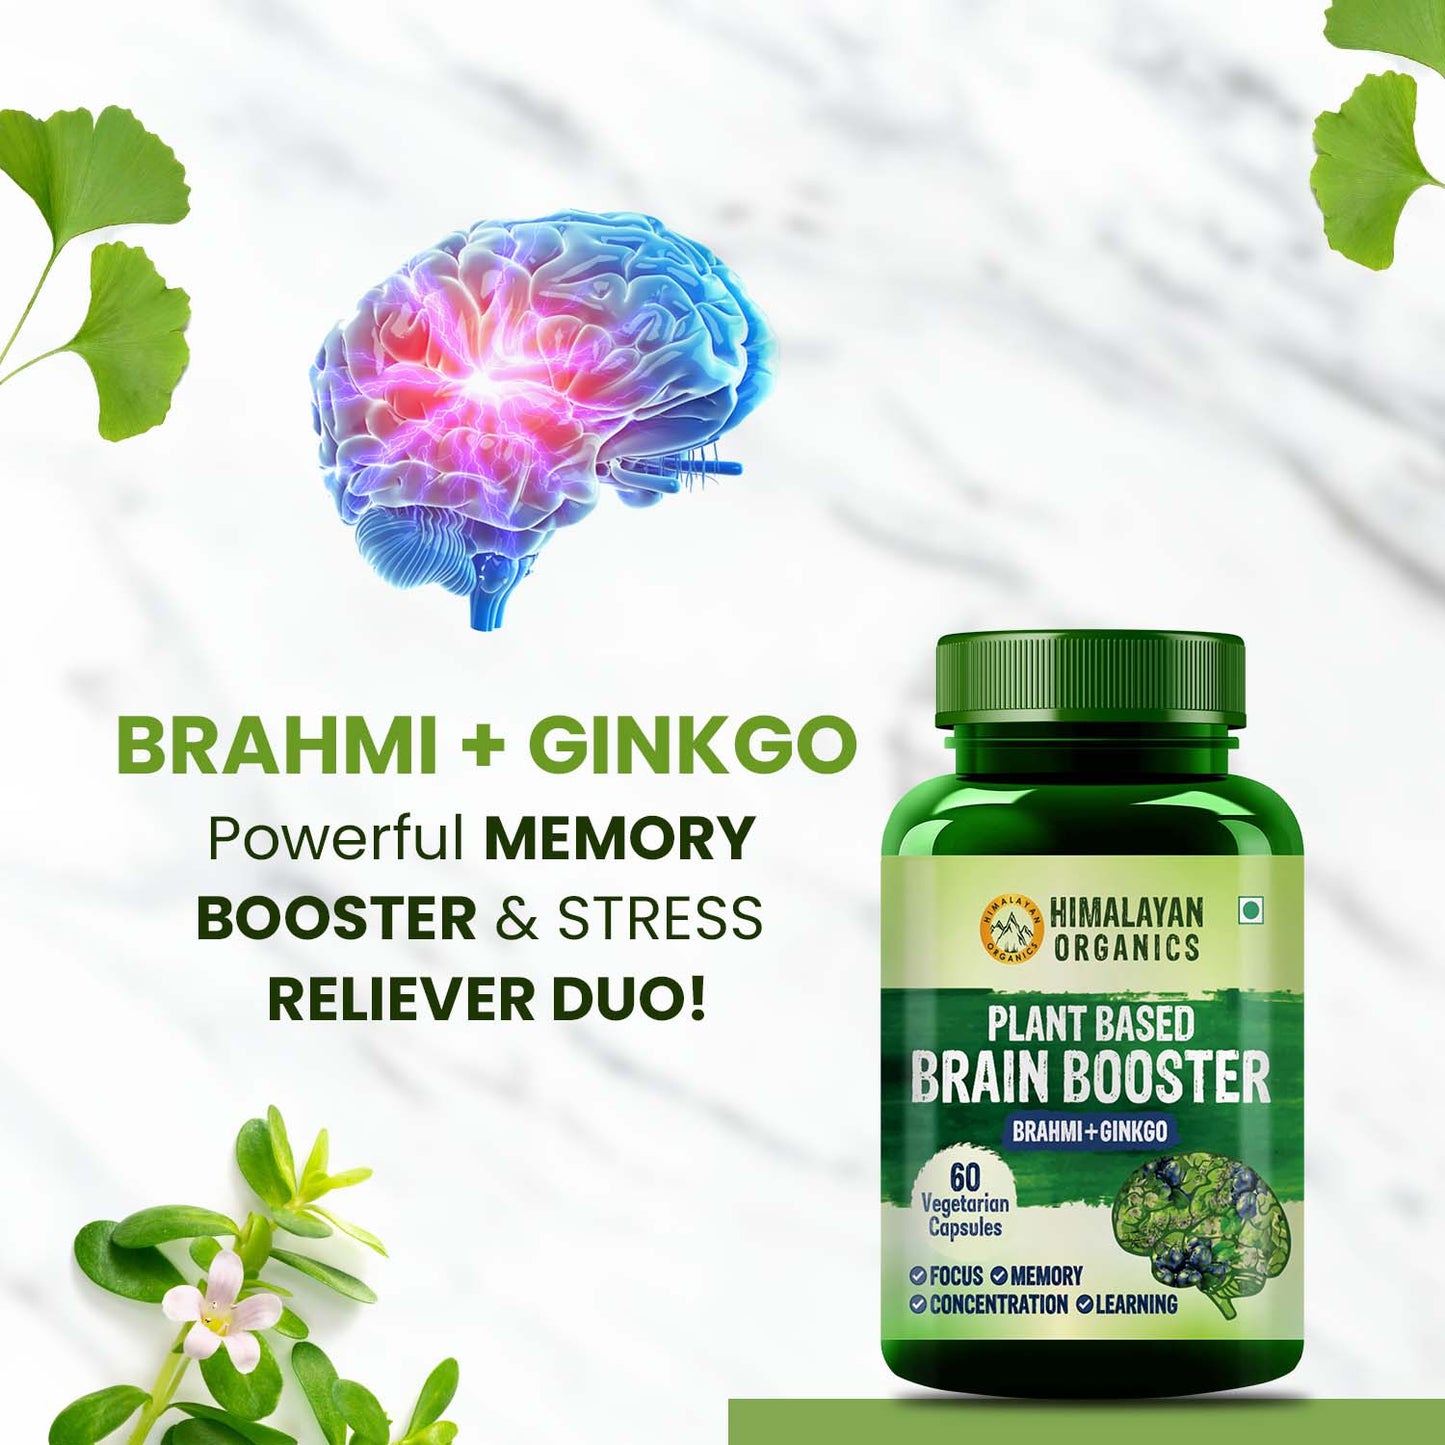 Himalayan Organics Plant Based Brain Booster Supplement with Ginkgo Biloba & Brahmi | Boost concentration & Learning Activities | 60 Veg Capsules